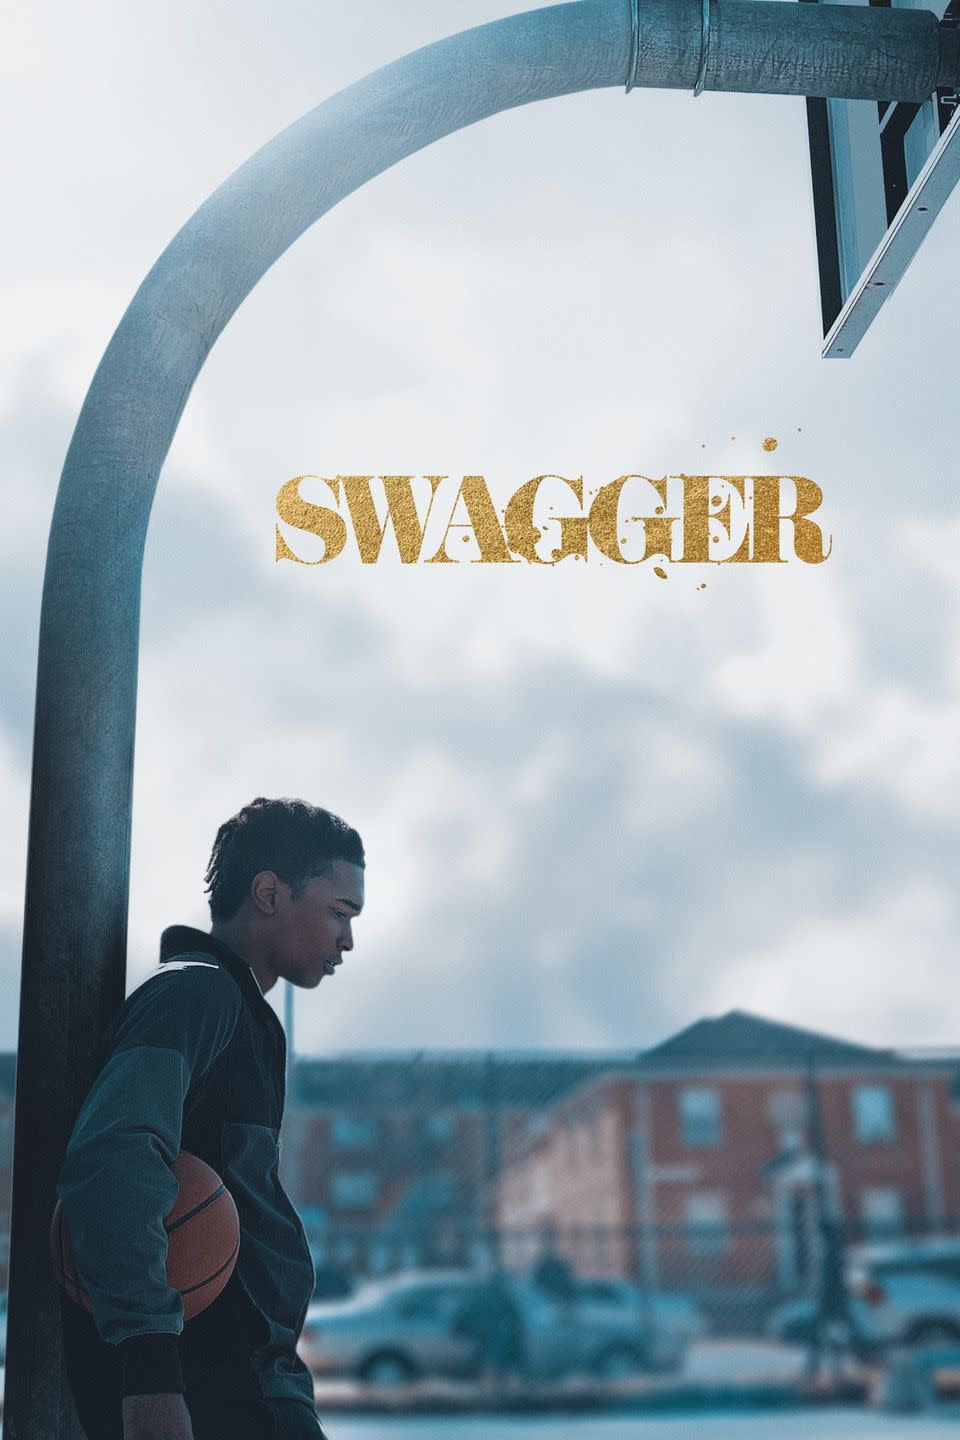 <p><em>Swagger </em>is the closest we’ve gotten to a proper look into our upbringing of two-time NBA champion and notoriously private Kevin Durant. Loosely based on the life of the Brooklyn Nets superstar, <em>Swagger</em> delves into the trials and tribulations of youth basketball through the experiences of basketball prodigy 14-year-old Jace Carson (Isaiah Hill) as he faces off against more competition than teenagers coming for his spot as the #1 player the DMV. <em>Straight Outta Compton</em>’s O’Shea Jackson Jr continues his acting maturation as Jace’s mentor Ike “Icon” Edwards, a man seeking redemption for his own basketball failings by leading others like him down the right path. Don’t let the ostentatious title fool you; Swagger is deeper than the flash. </p><p><a class="link " href="https://go.redirectingat.com?id=74968X1596630&url=https%3A%2F%2Ftv.apple.com%2Fus%2Fshow%2Fswagger%2Fumc.cmc.63e208601mwndrxpmguc5stbo&sref=https%3A%2F%2Fwww.menshealth.com%2Fentertainment%2Fg40091153%2Fbest-shows-on-apple-tv%2F" rel="nofollow noopener" target="_blank" data-ylk="slk:Stream It Here">Stream It Here</a></p>